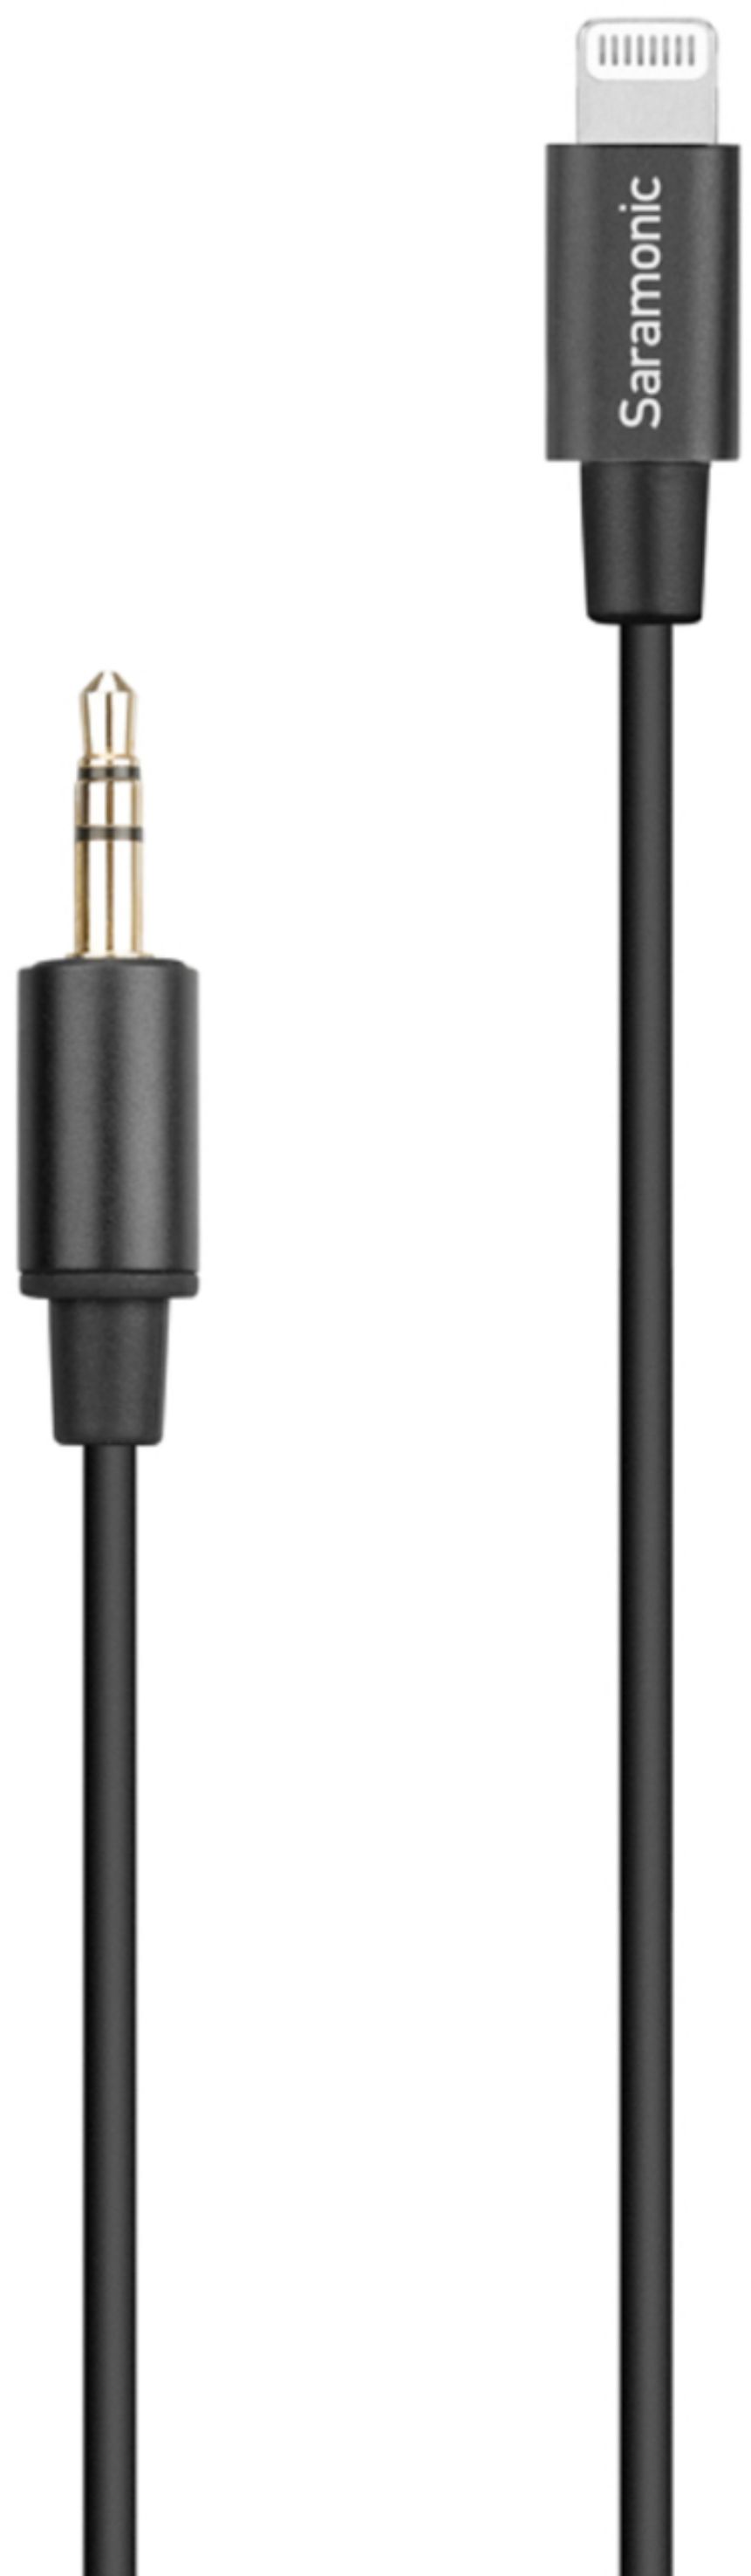 Monster Lavalier 8-Pin Clip-On Mic, iPhone/iPad Support, Plug and Play  MSV7-1028-BLK - The Home Depot